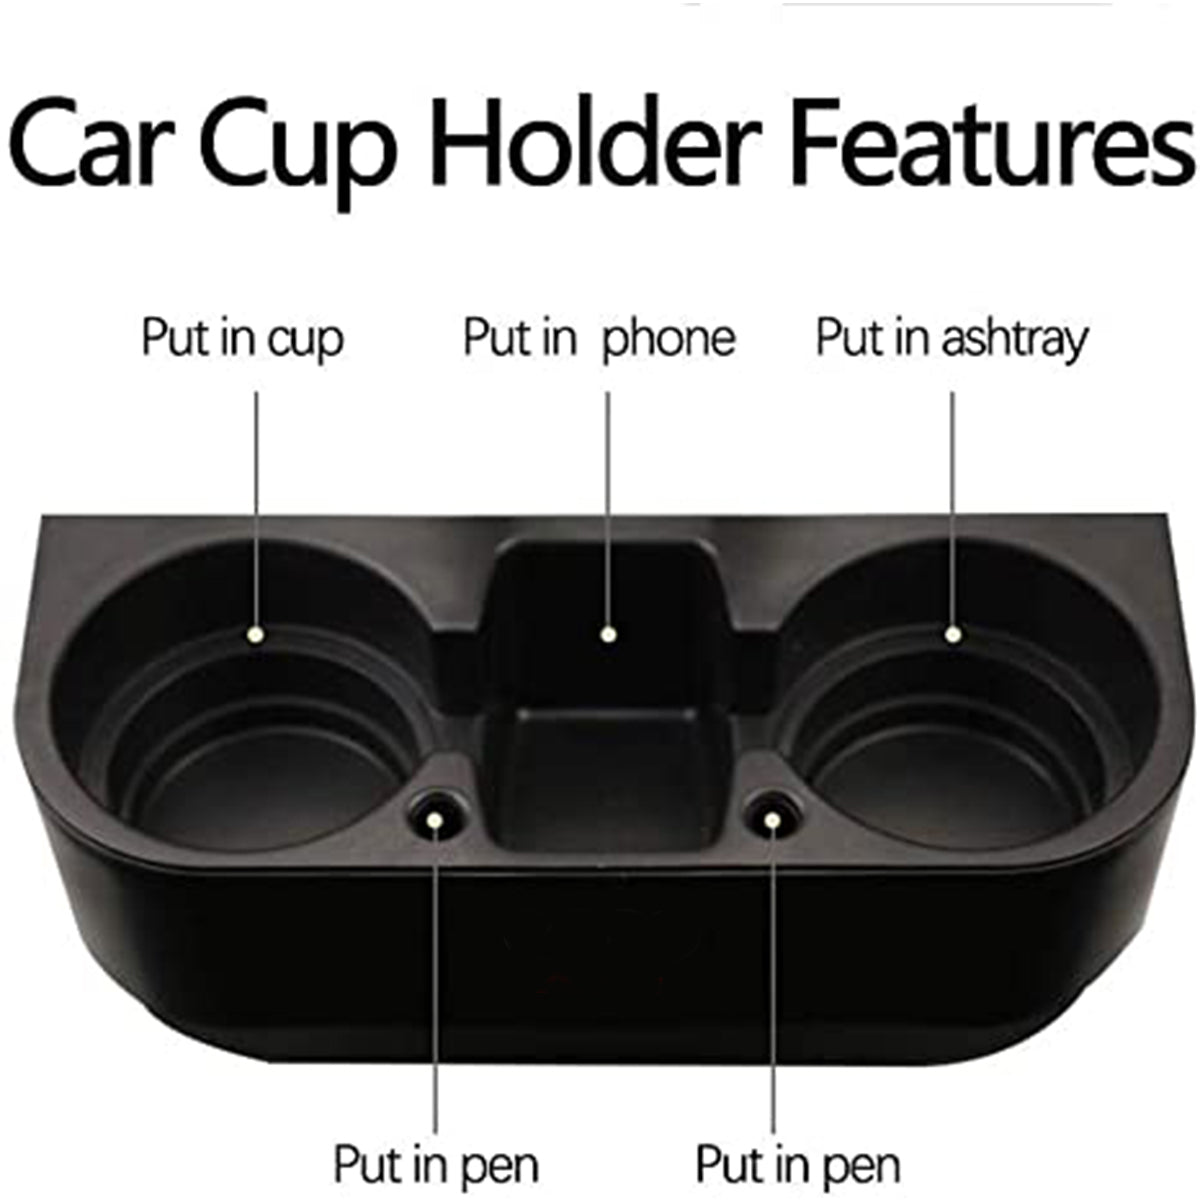 Cup Holder Portable Multifunction Vehicle Seat Cup Cell Phone Drinks Holder Box Car Interior Organizer, Custom For Your Cars, Car Accessories MS11995 - Delicate Leather